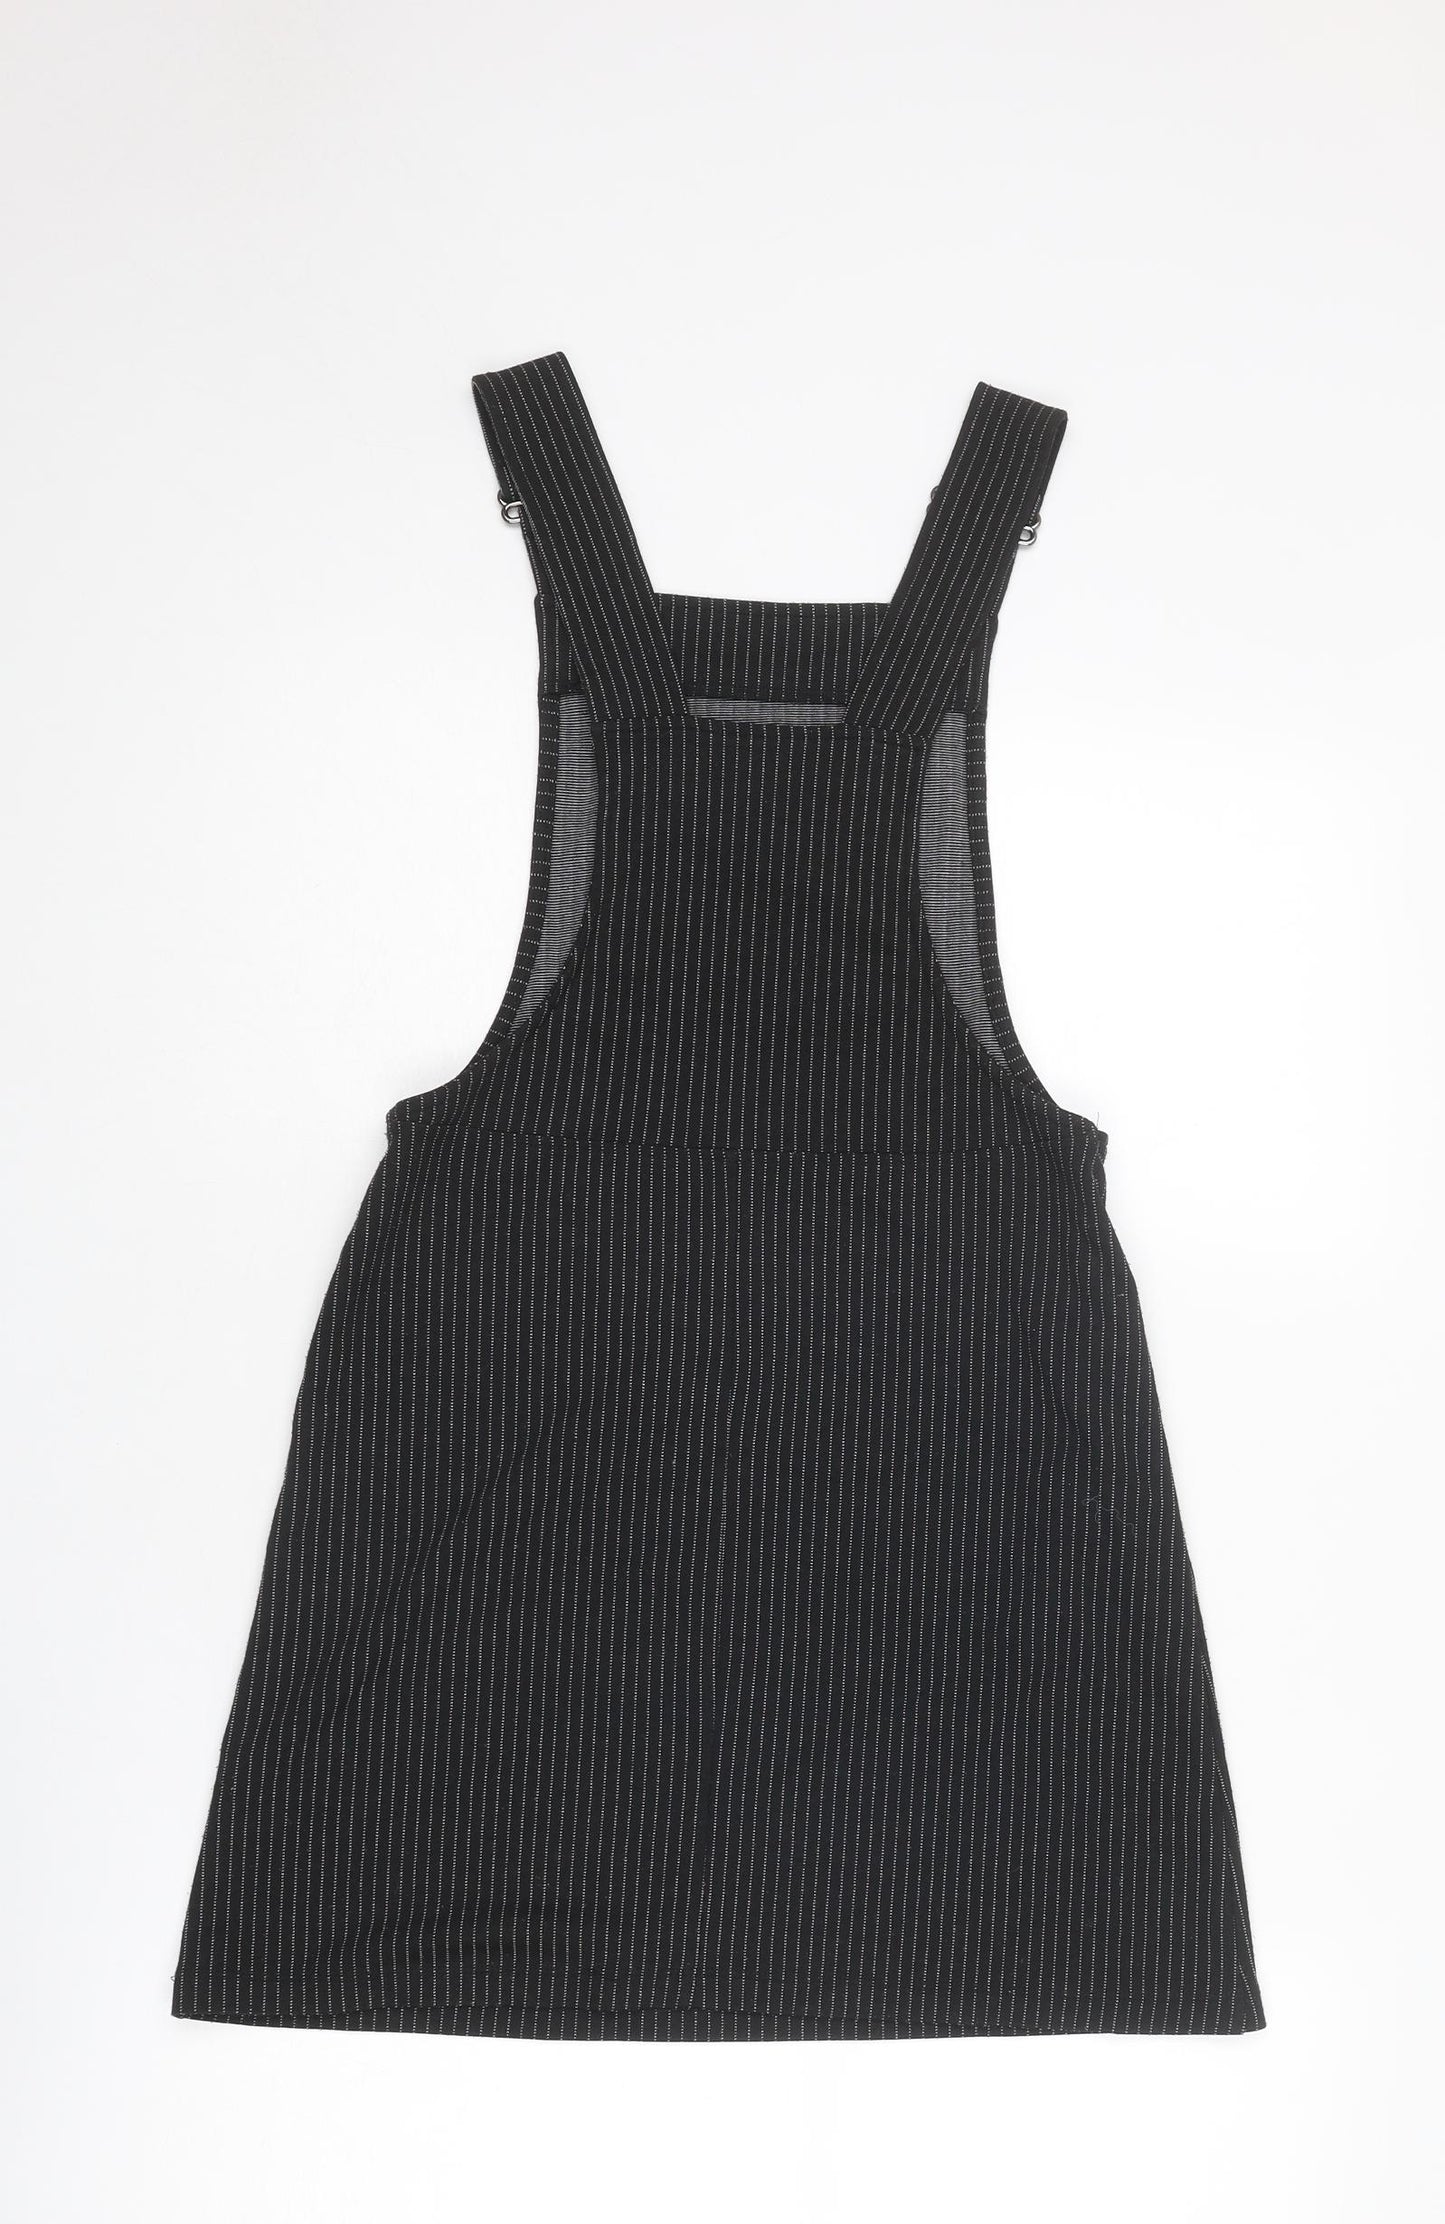 Topshop Womens Black Striped Polyester Pinafore/Dungaree Dress Size 6 Square Neck Pullover